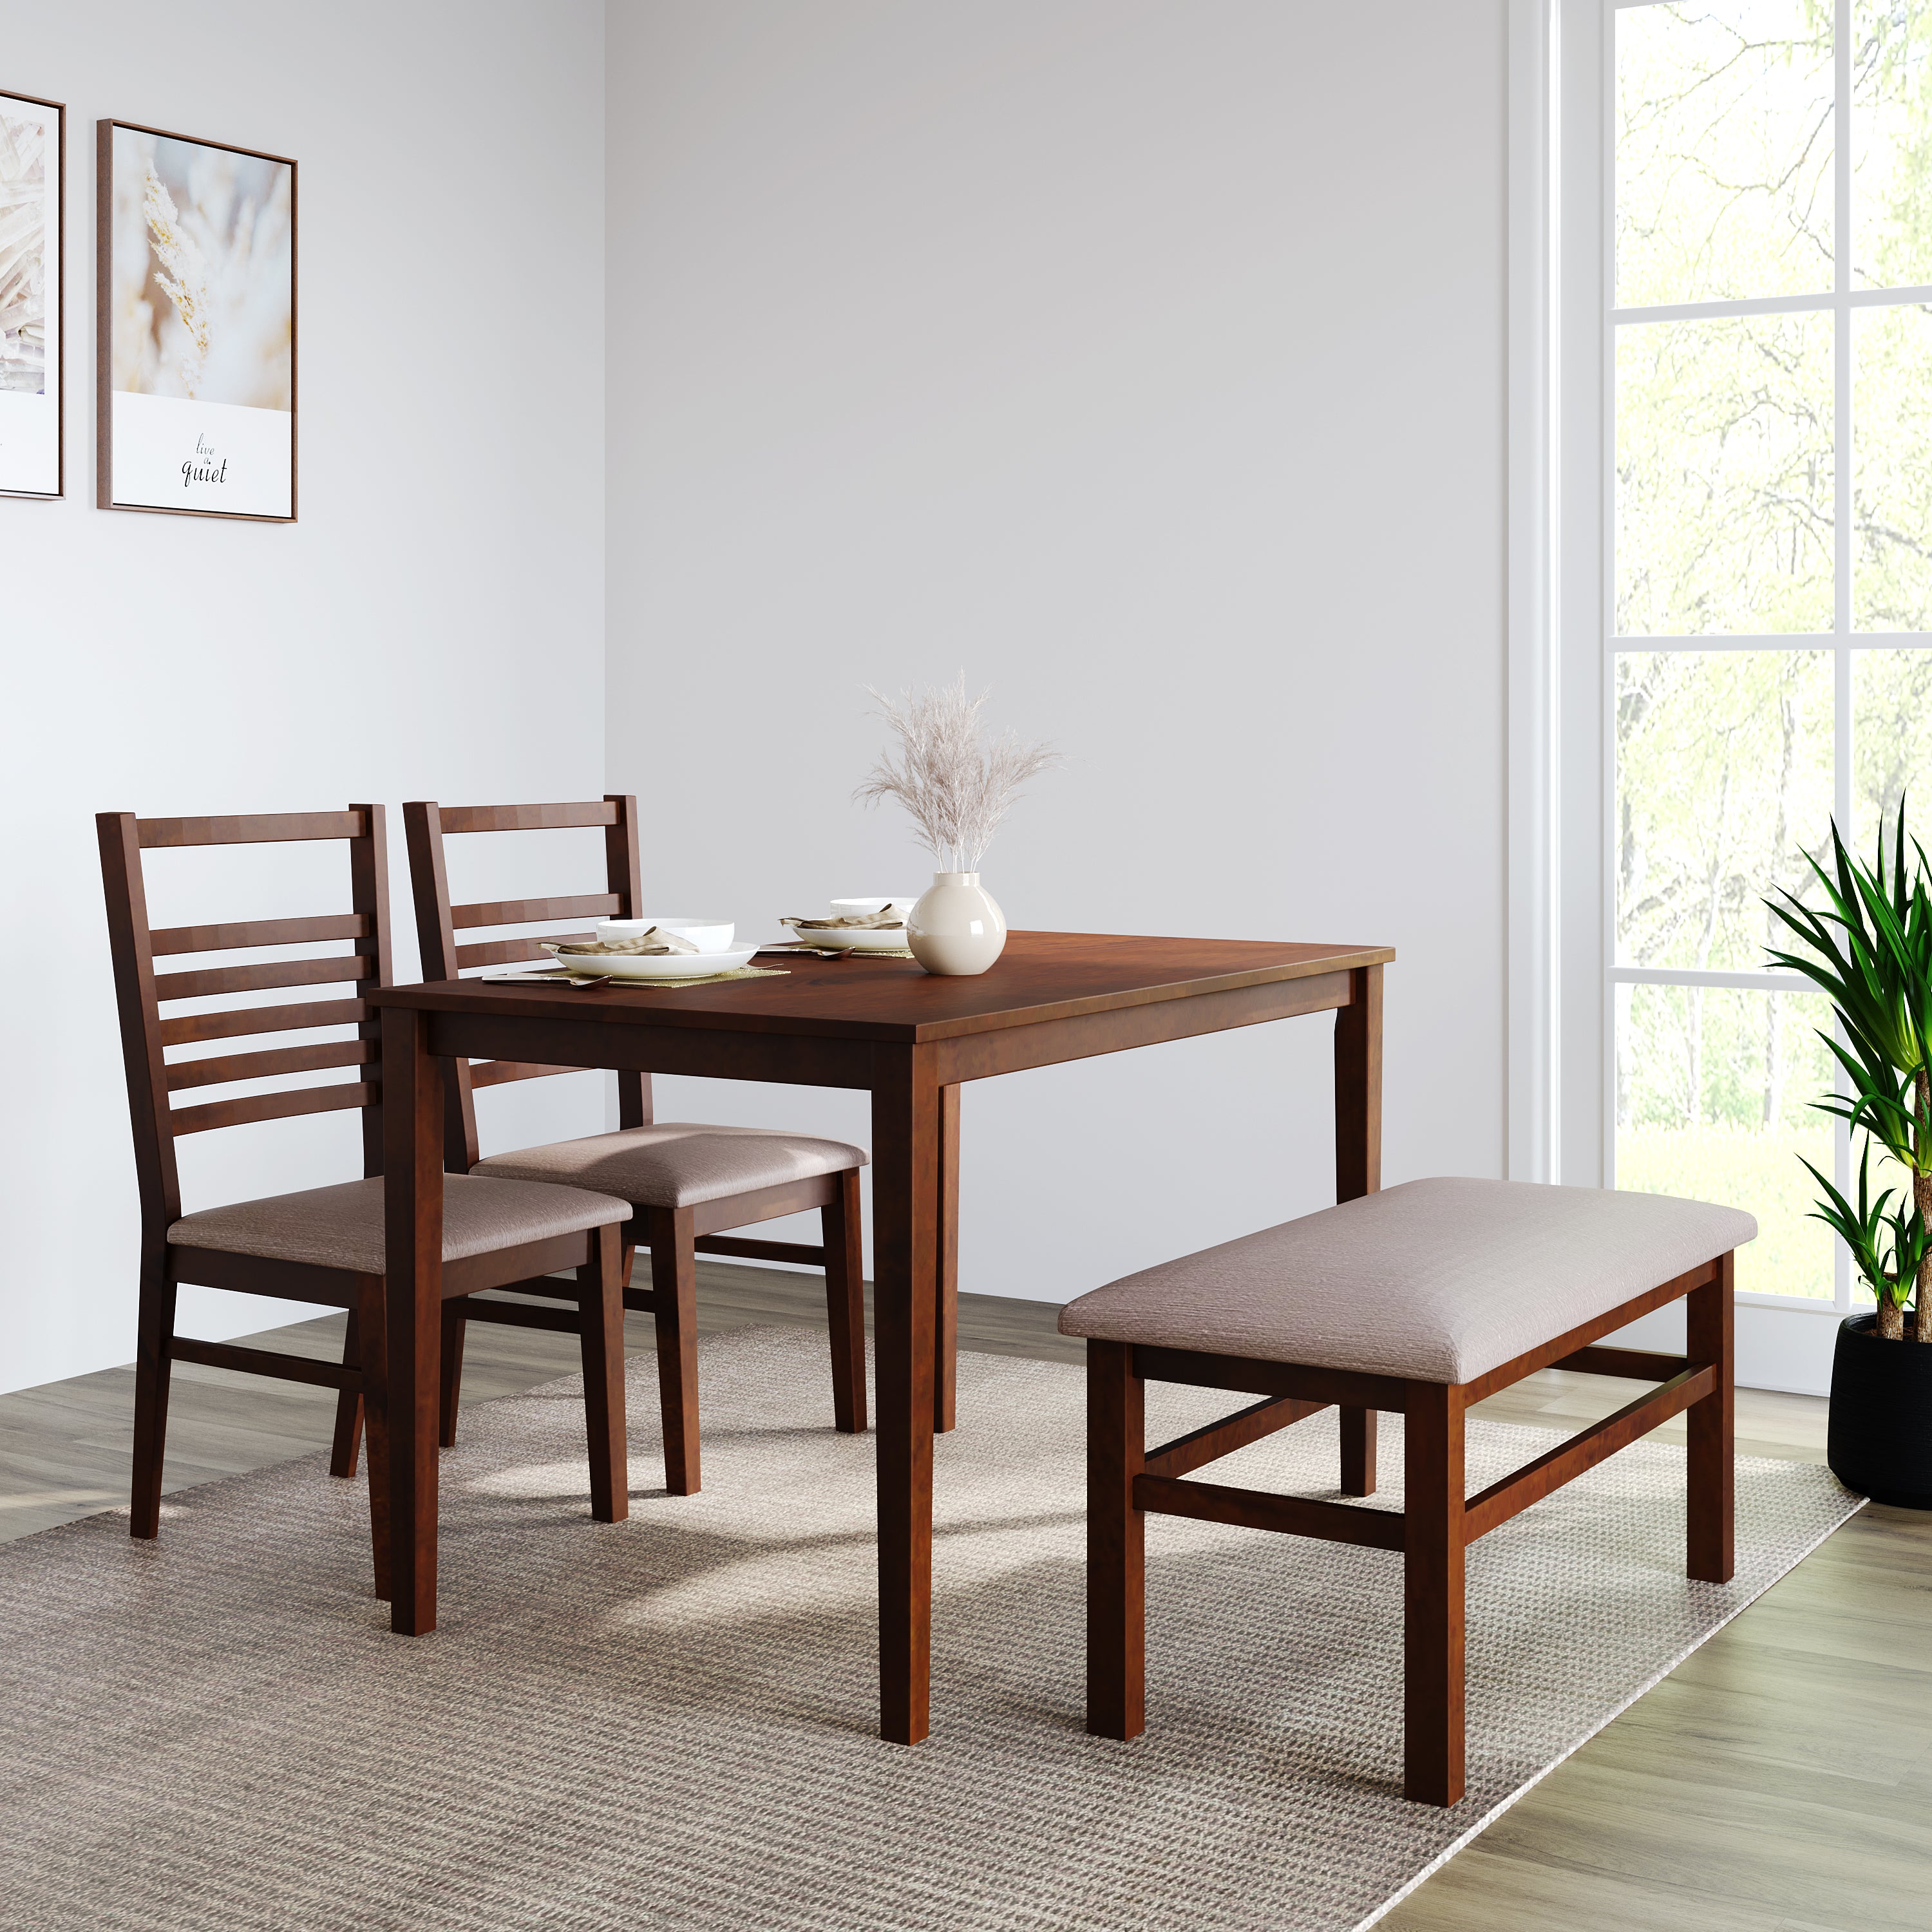 Gem 4 Seater Dining Set With Bench (Cappucino)